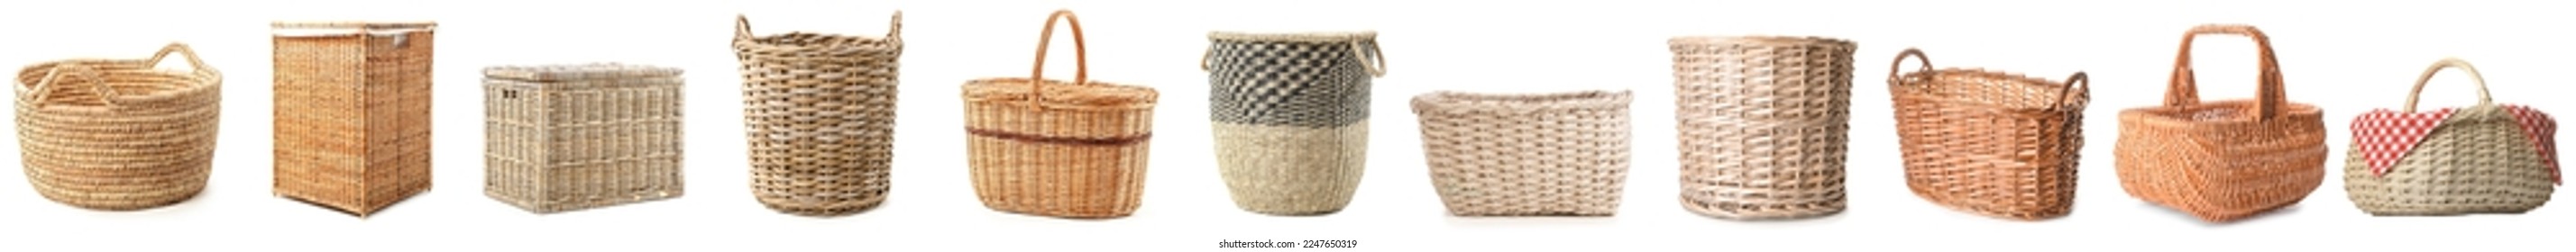 Collection of stylish rattan baskets on white background